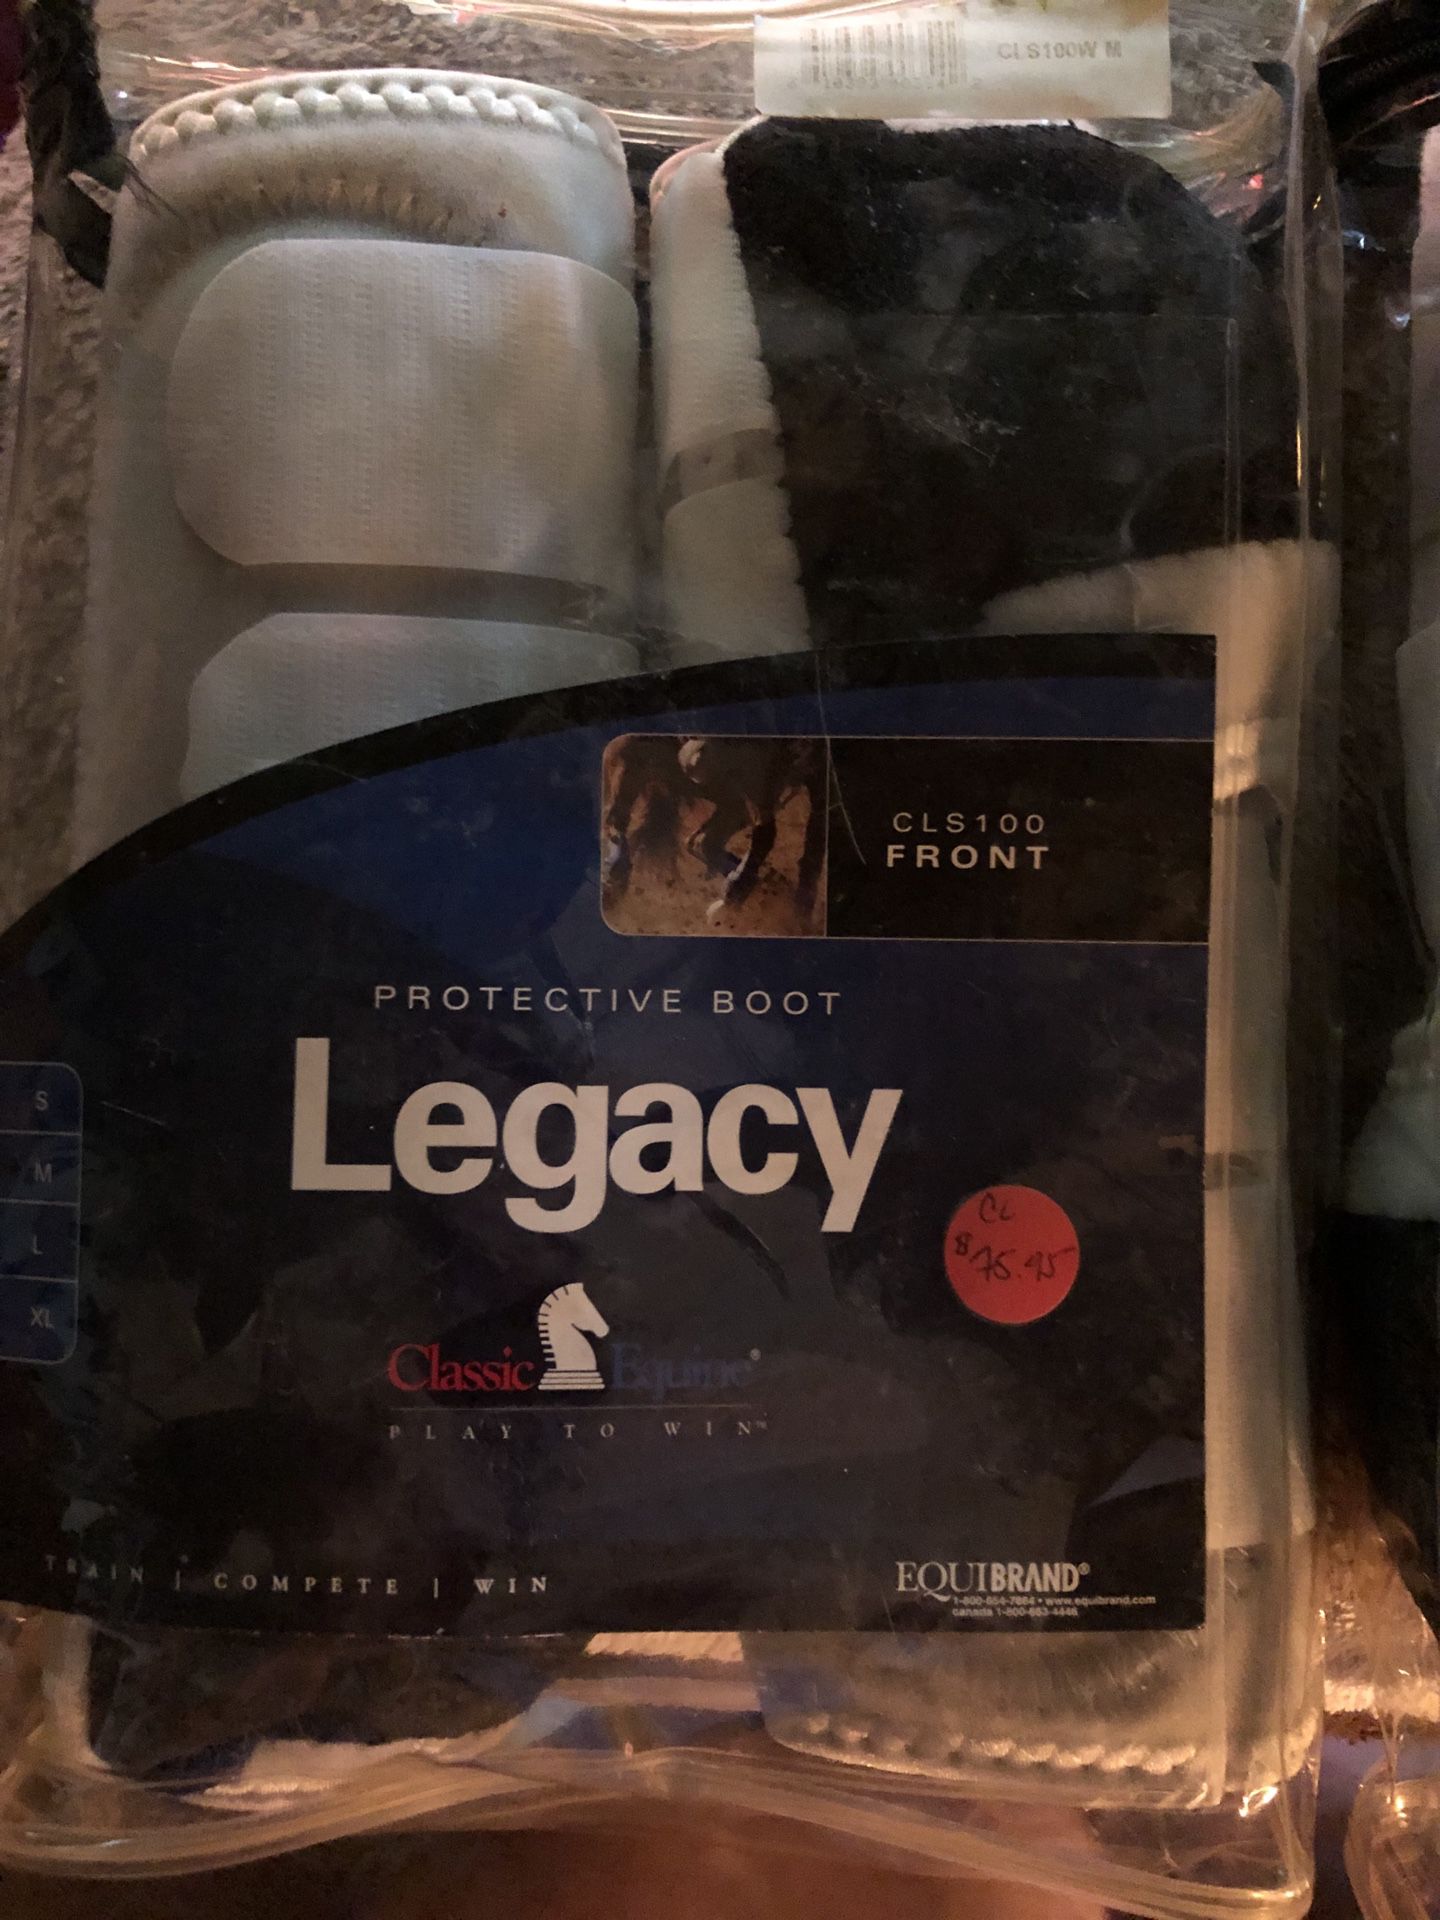 Legacy boots for horse fronts and hinds brand new never used